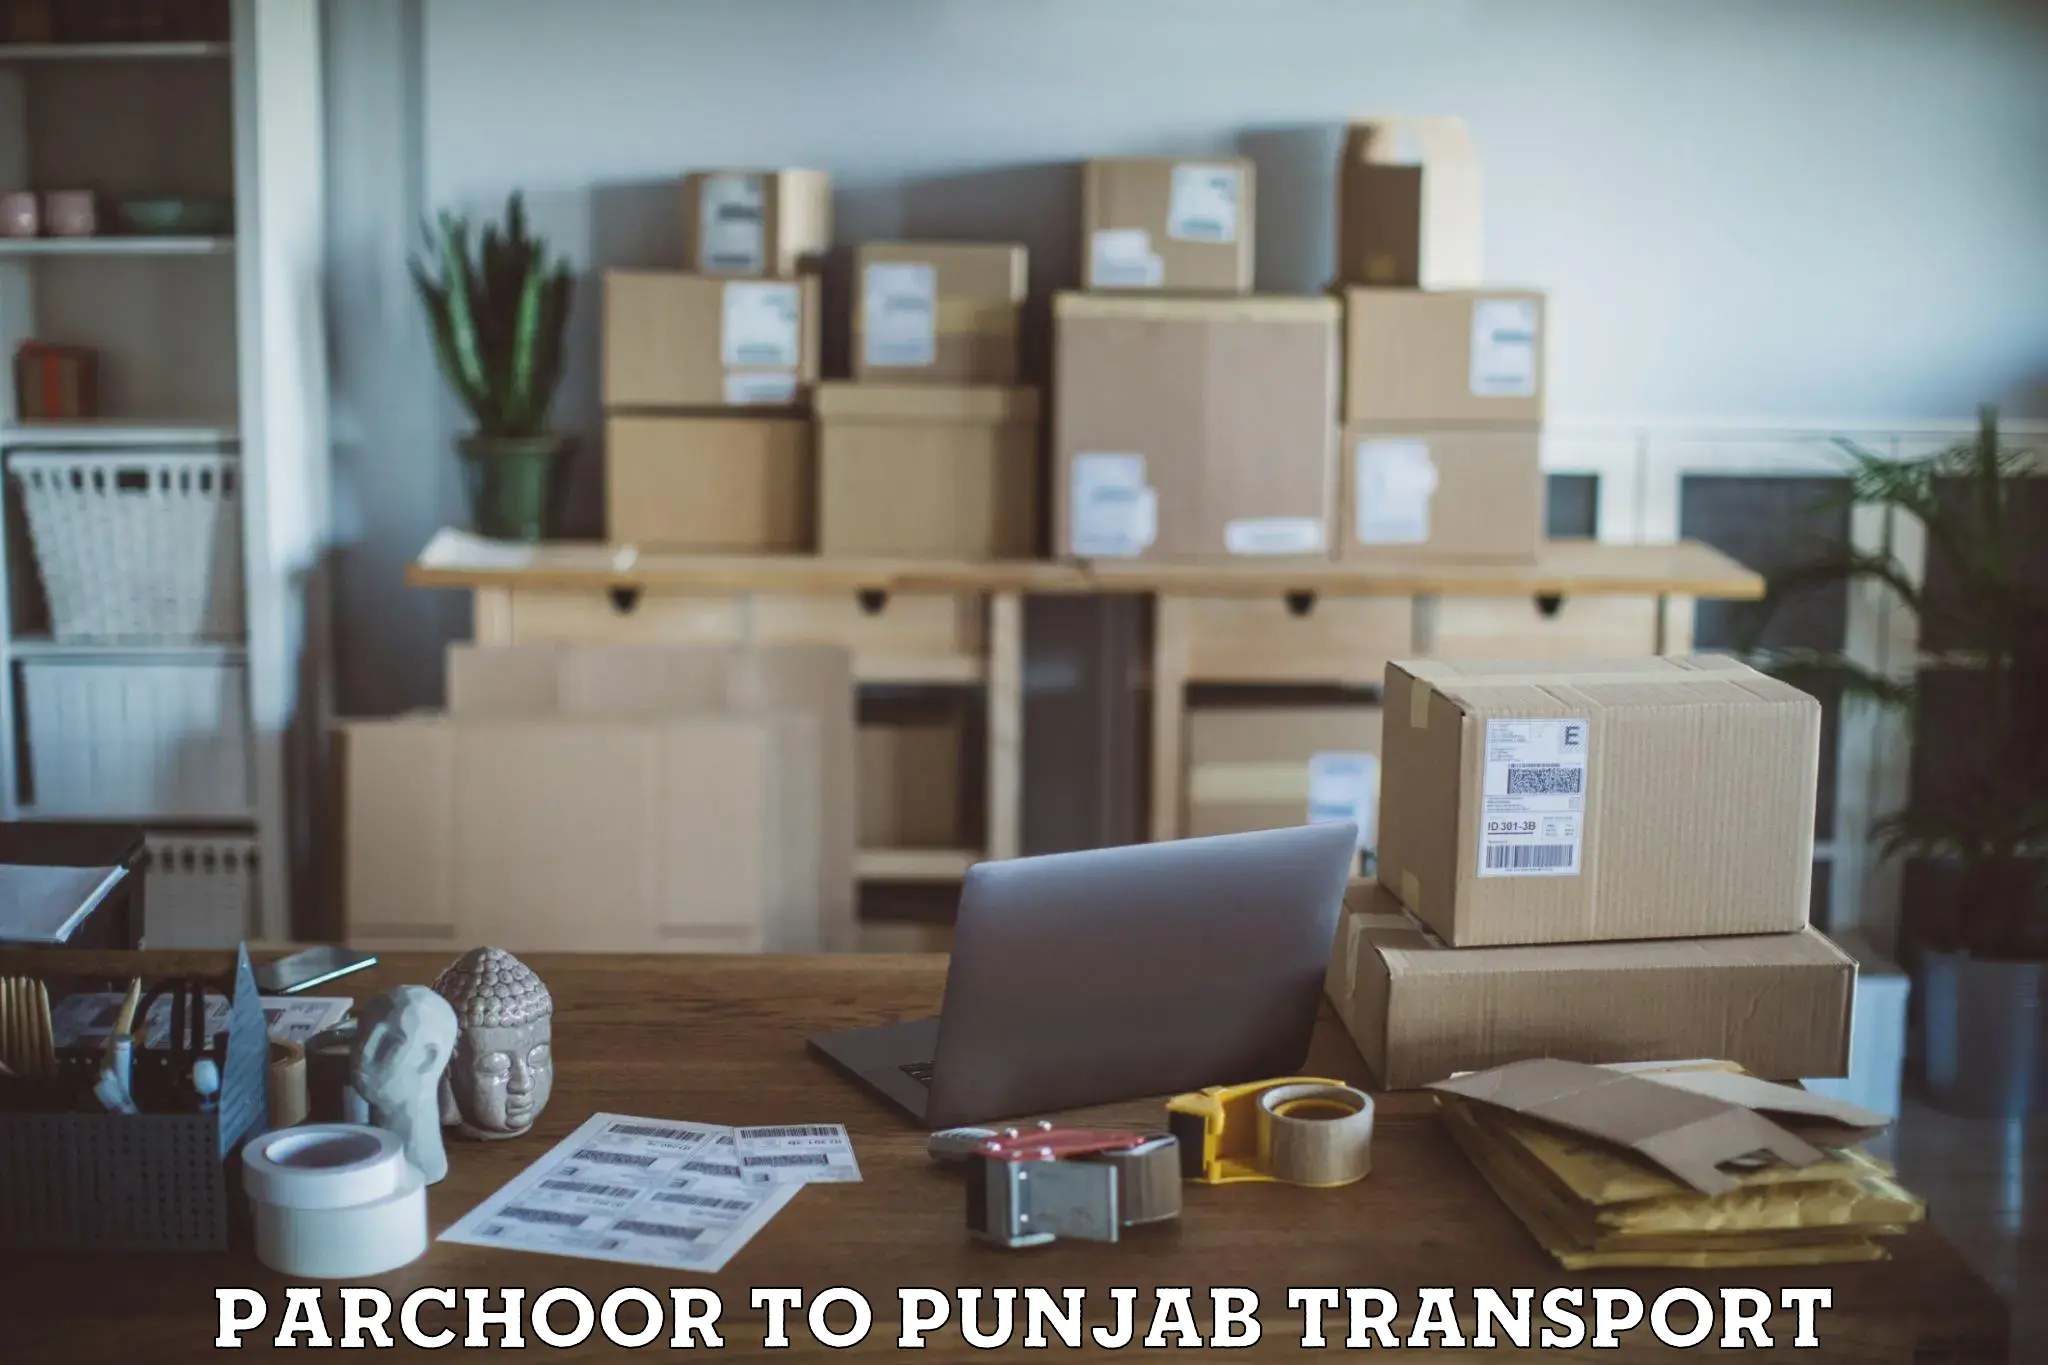 Daily parcel service transport Parchoor to Rampura Phul